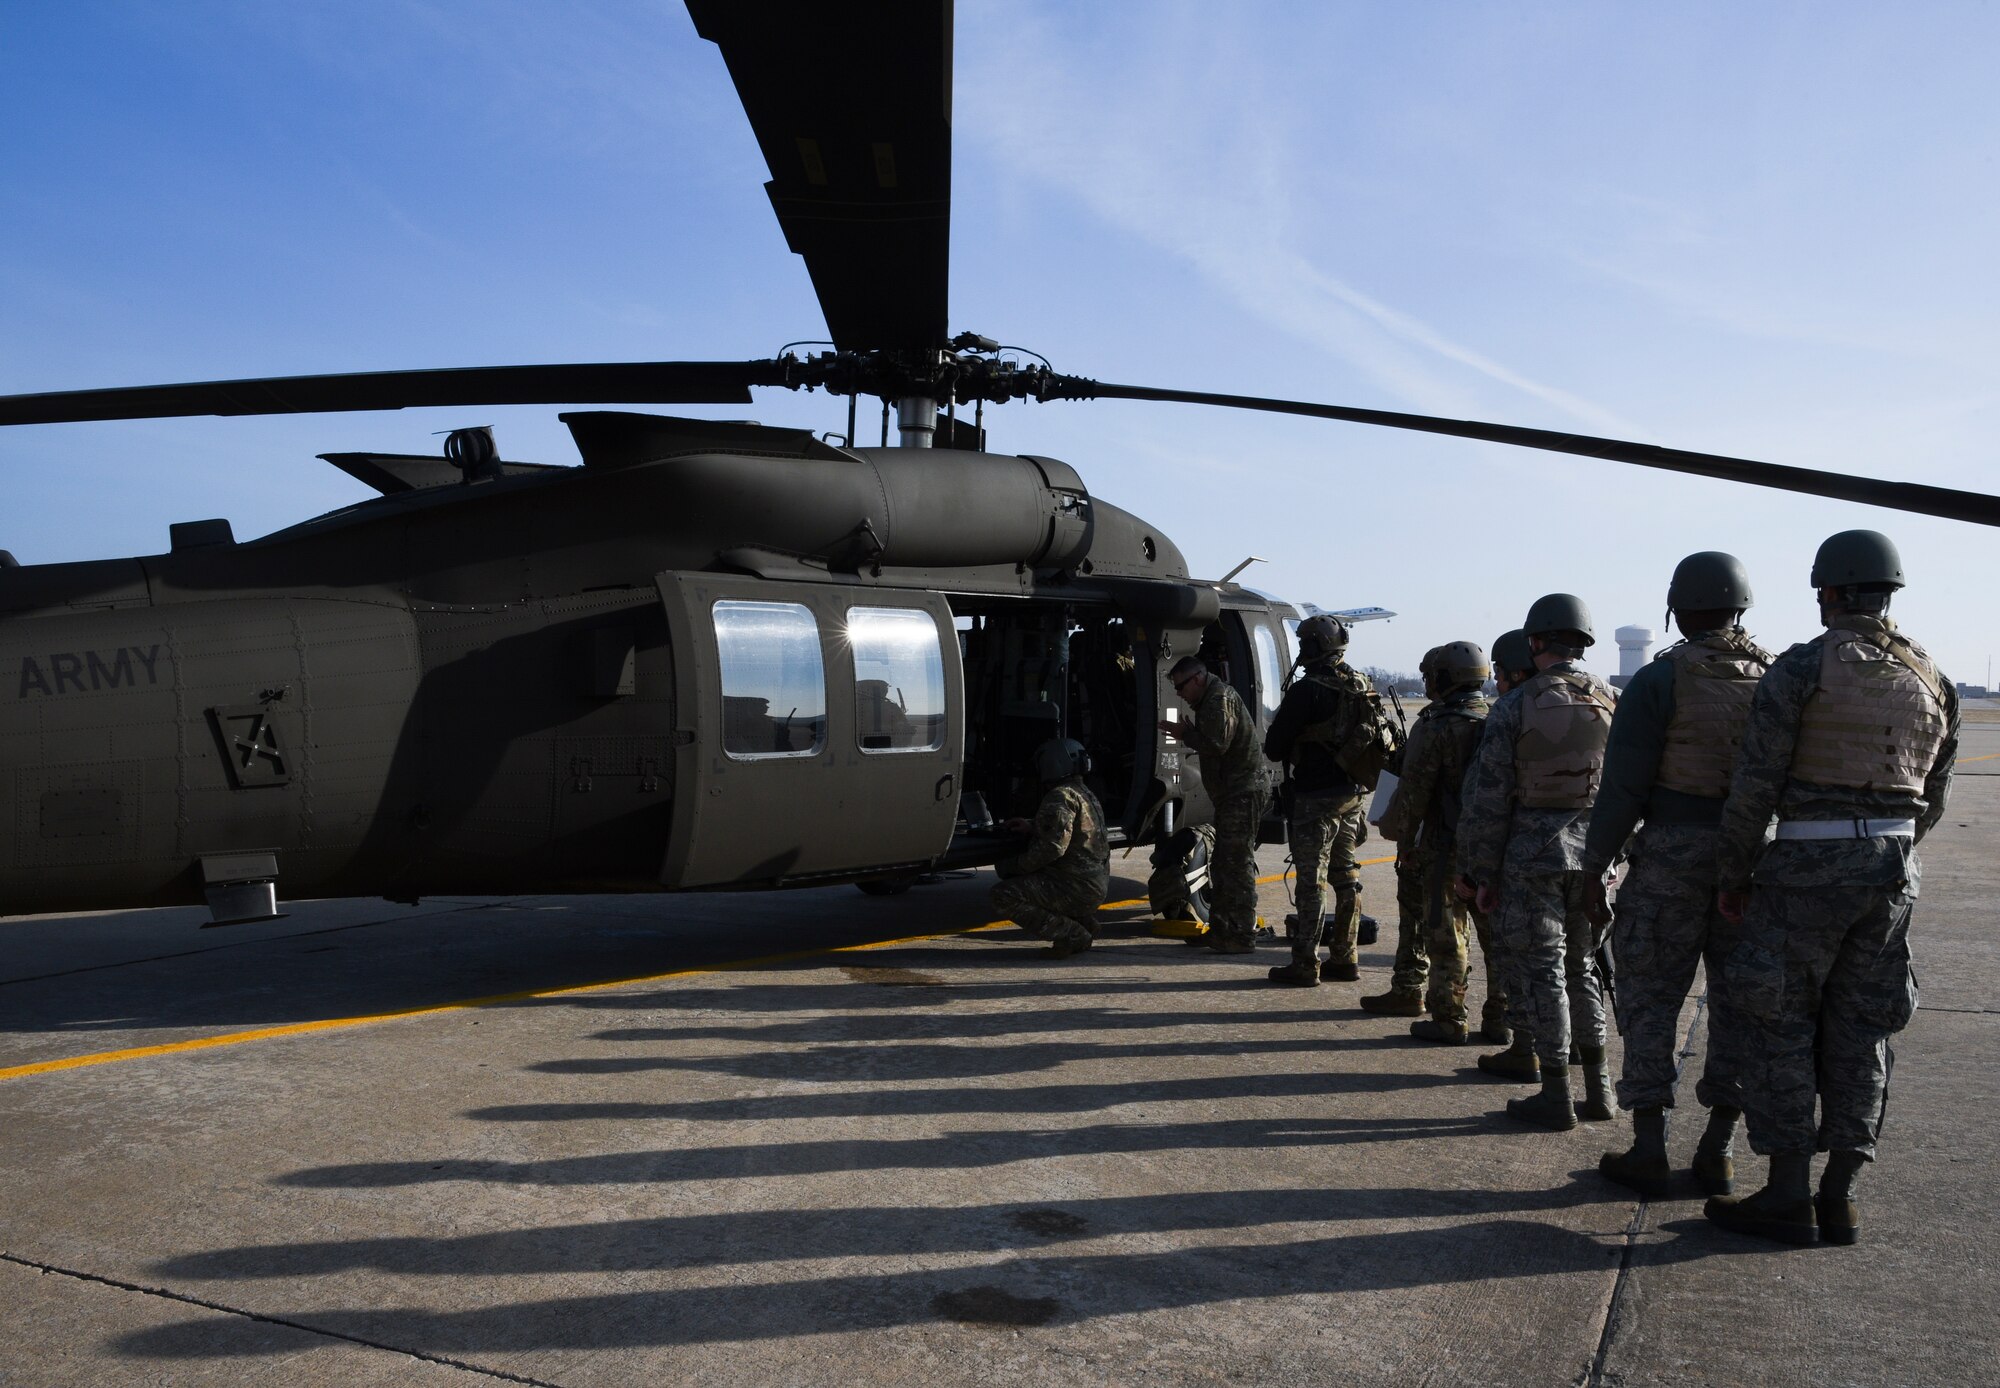 Long shadows are cast upon the flight line as members of the 137th Special Operations Wing, Oklahoma Air National Guard, line up to board an Oklahoma Army National Guard UH-60M Black Hawk at Tinker Air Force Base during SENTRY REX 19-01 exercise on Jan. 15th.